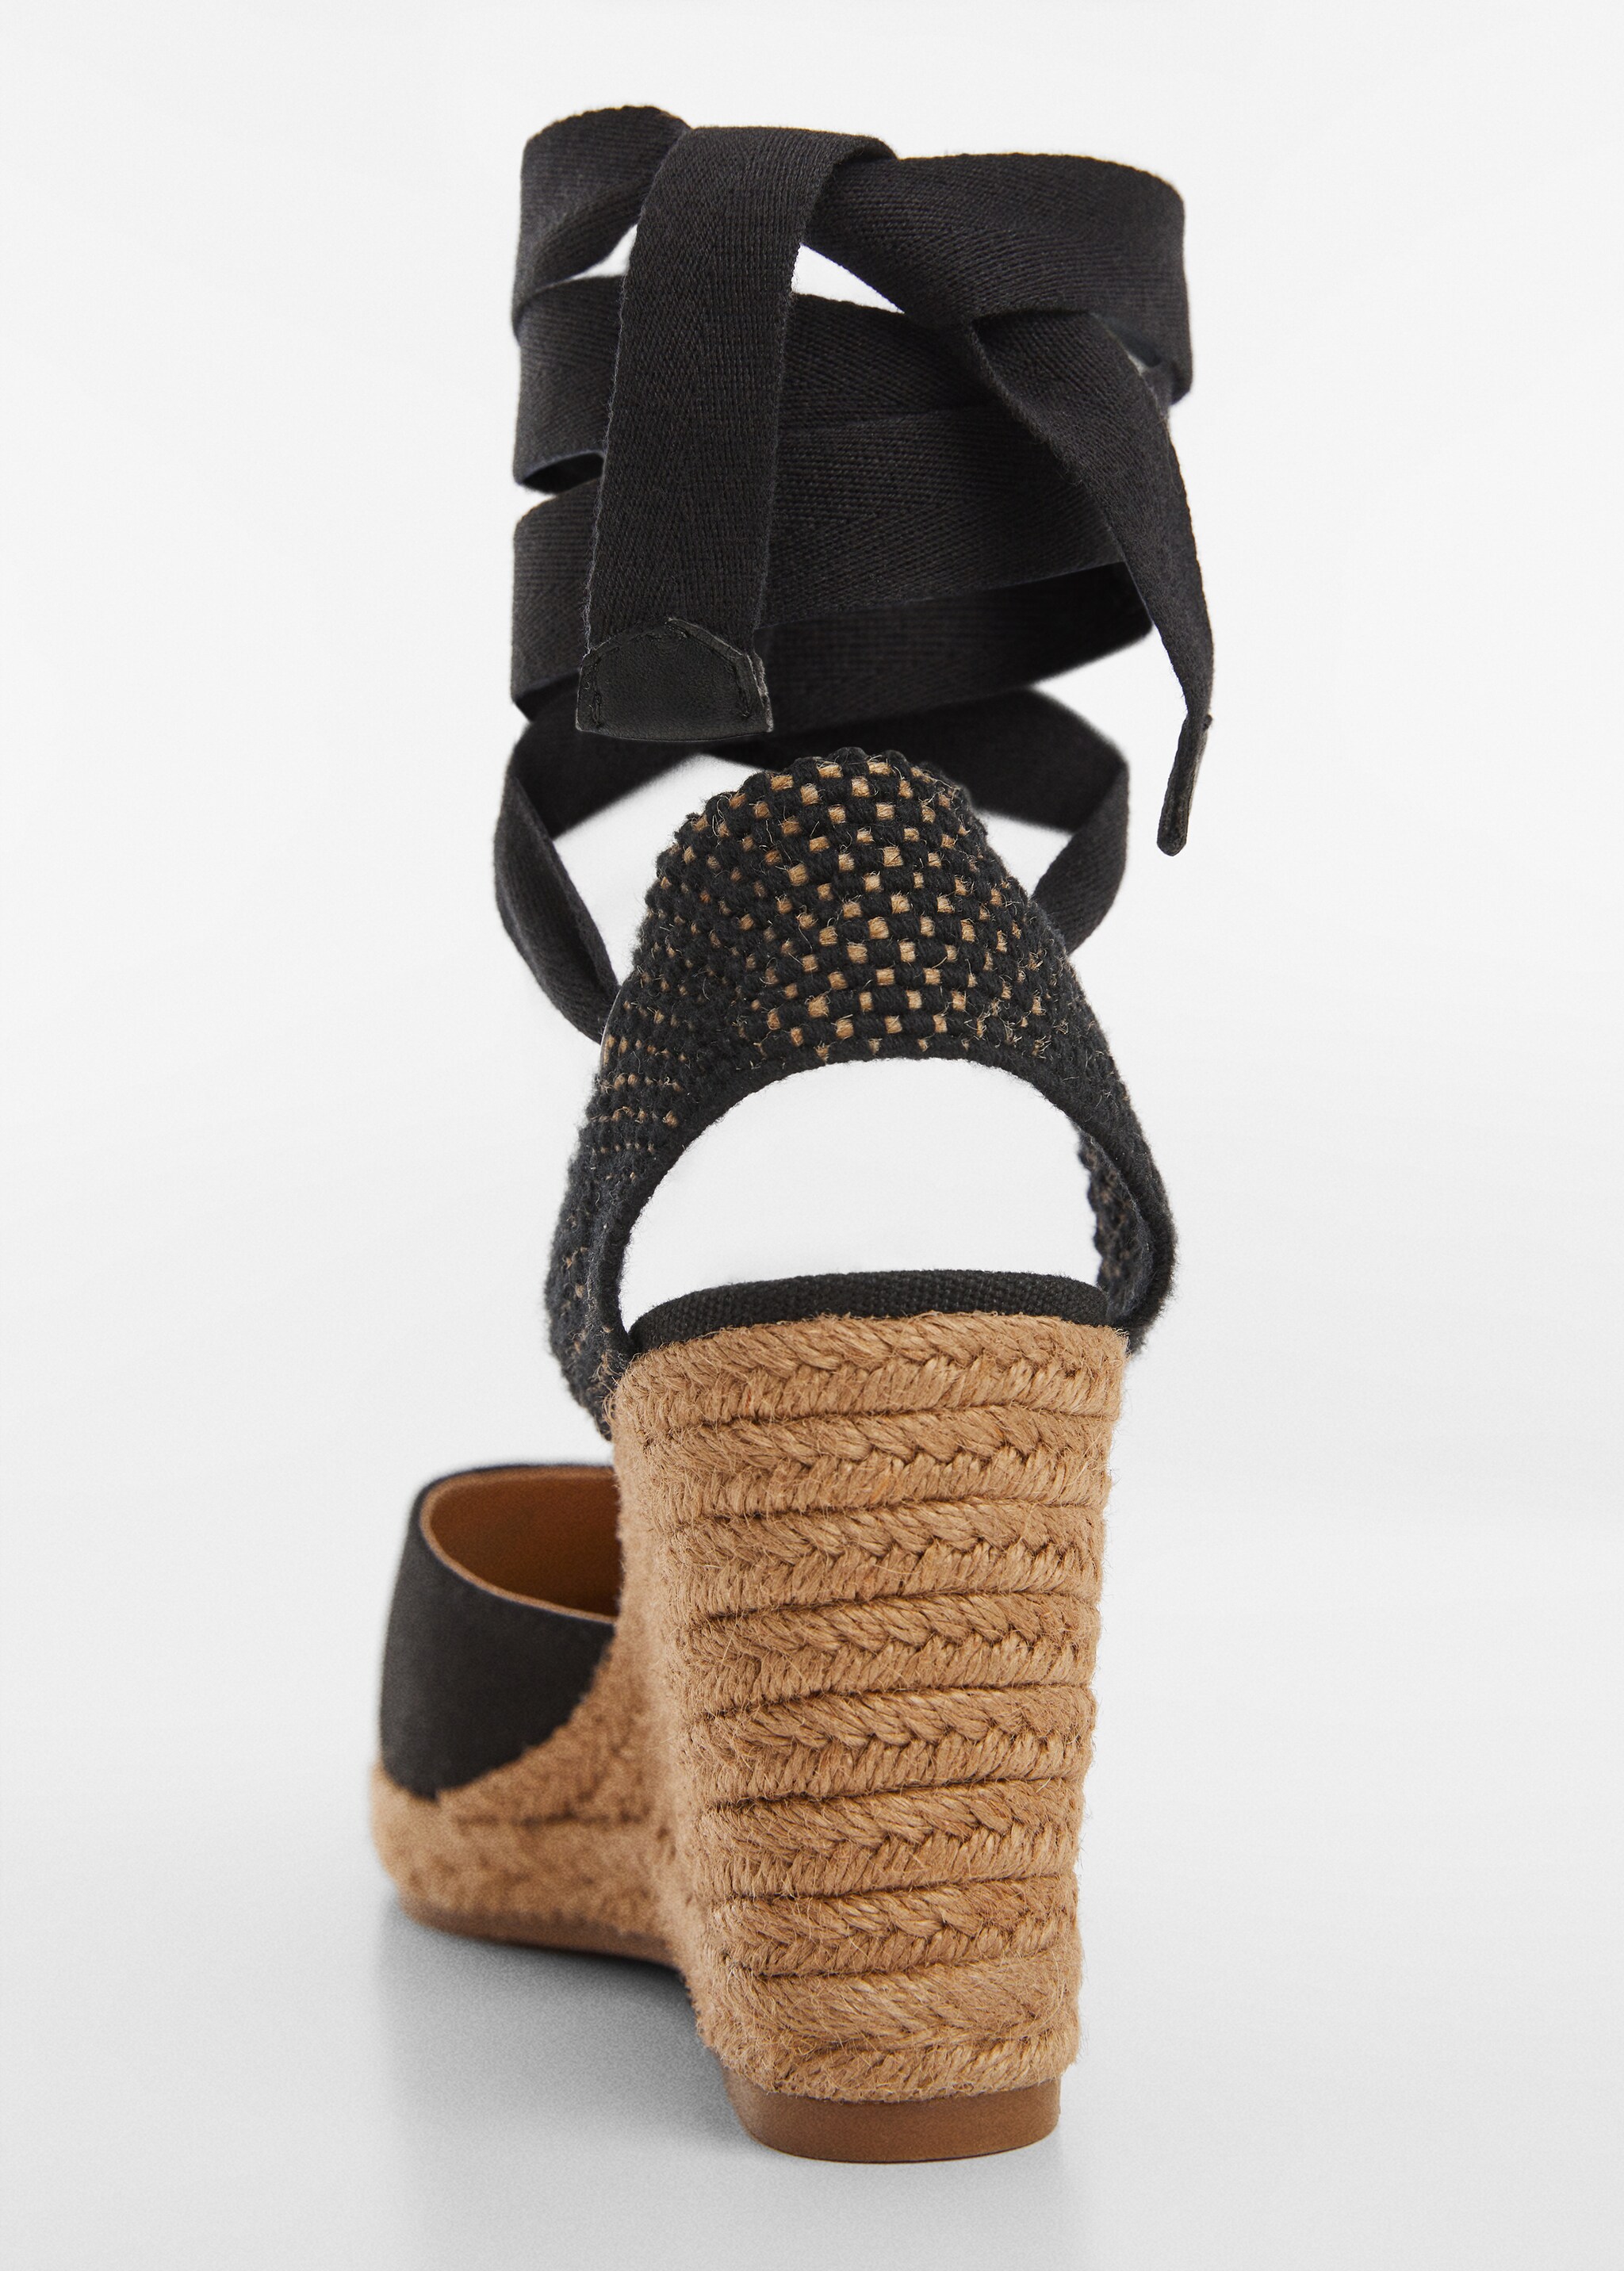 Lace-up espadrilles - Details of the article 3